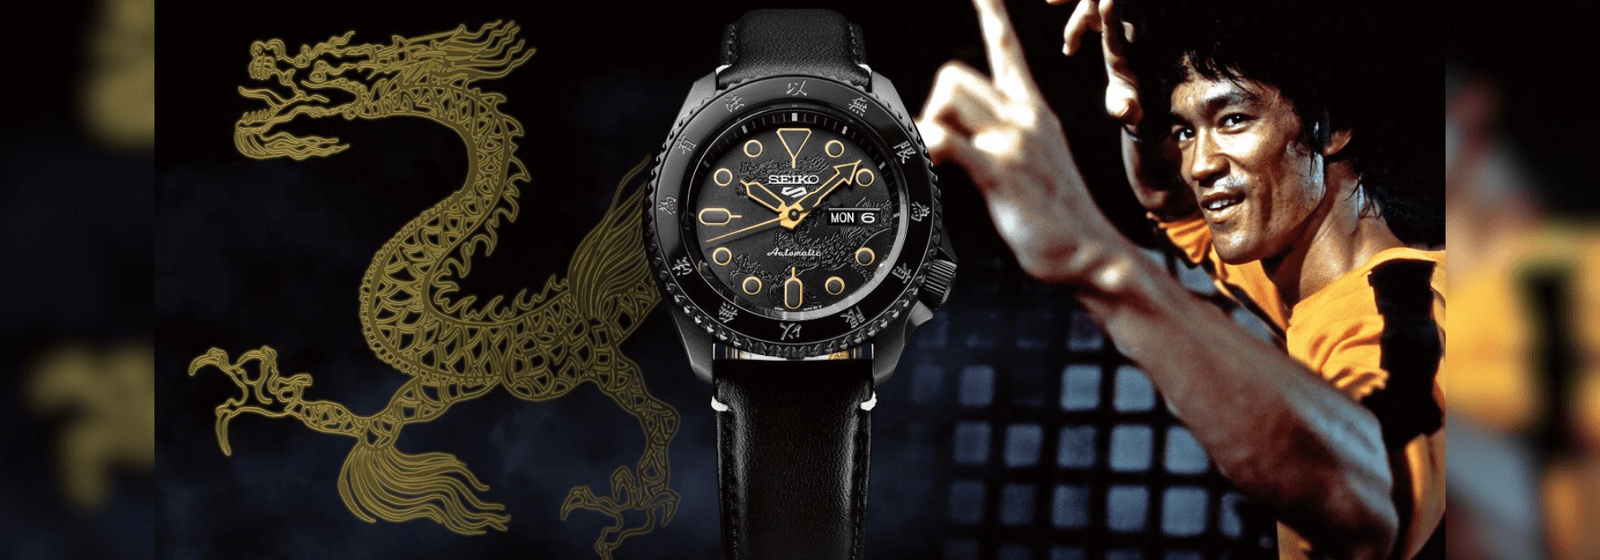 Seiko Honors Bruce Lee with a Special Edition Seiko 5 Sports Watch